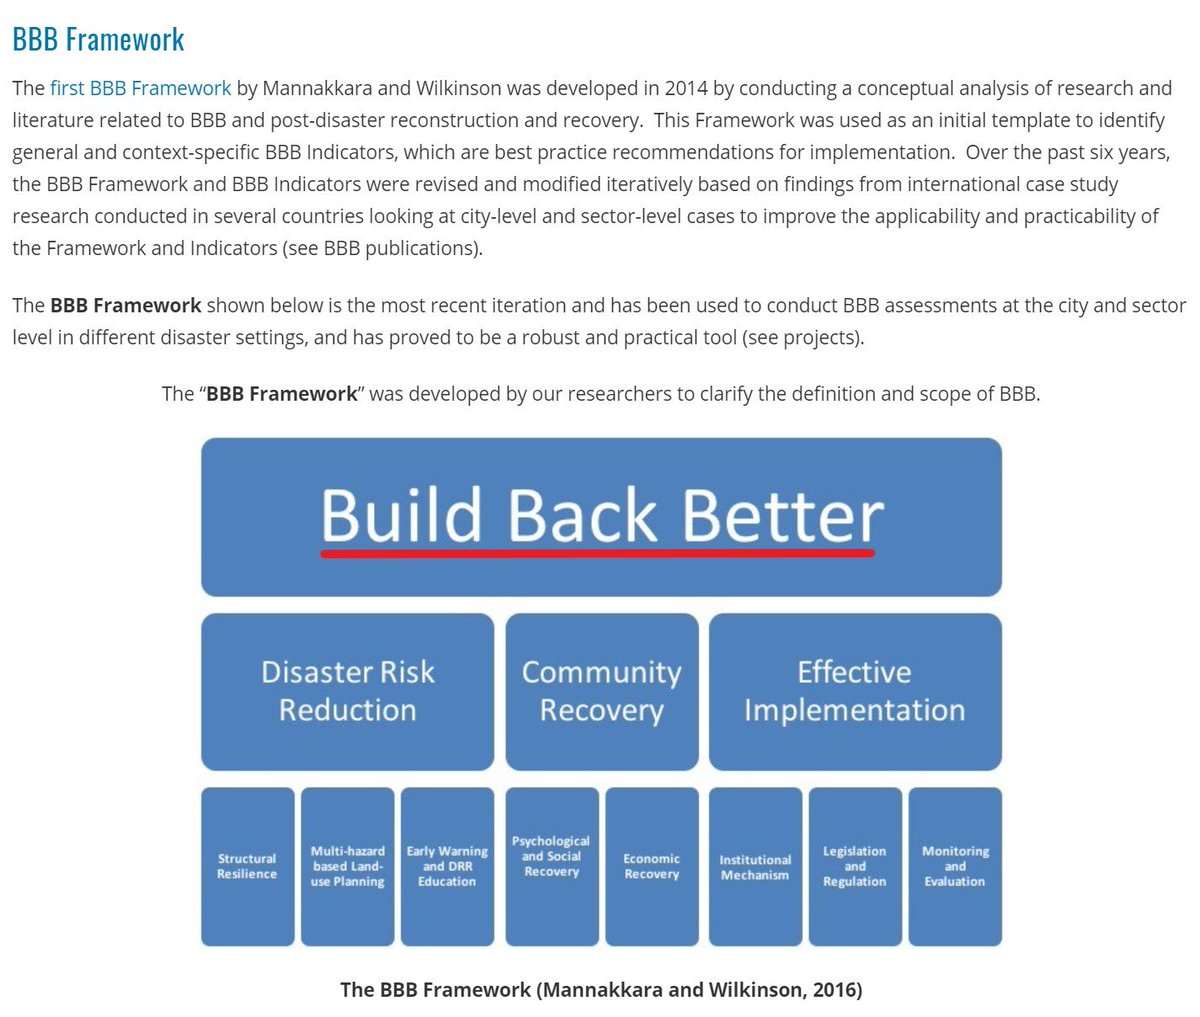 5/12Data harvesting and lessons learned from Sri Lanka were put to the test and by 2014 international guidelines were in place.  #BuildBackBetter was becoming a name brand.